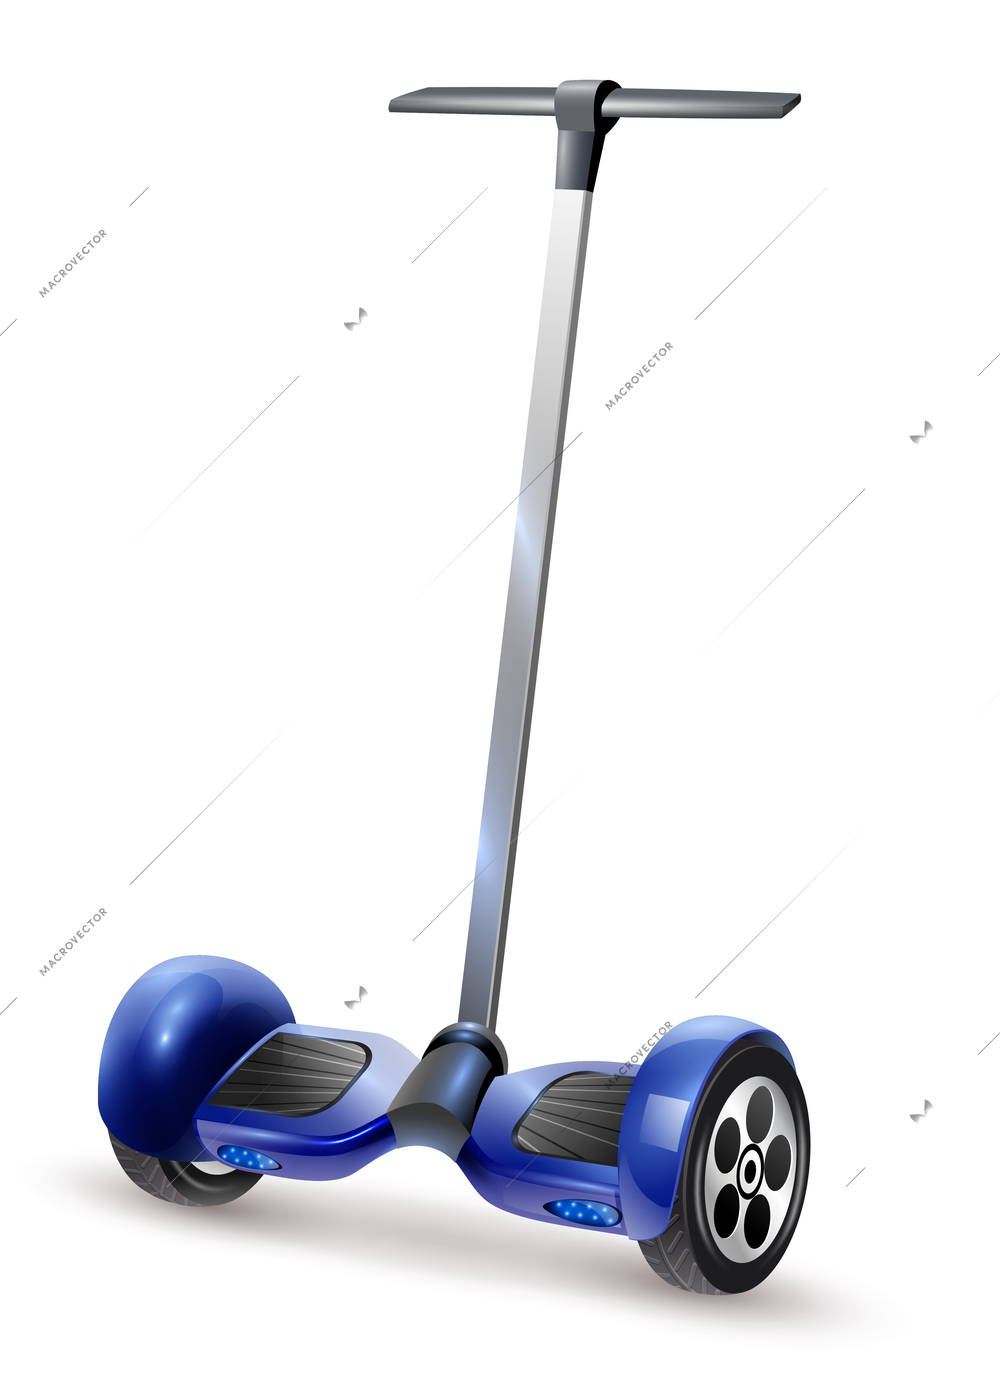 Realistic self-balancing gyro two-wheeled board scooter or hoverboard close up view dark blue vector illustration